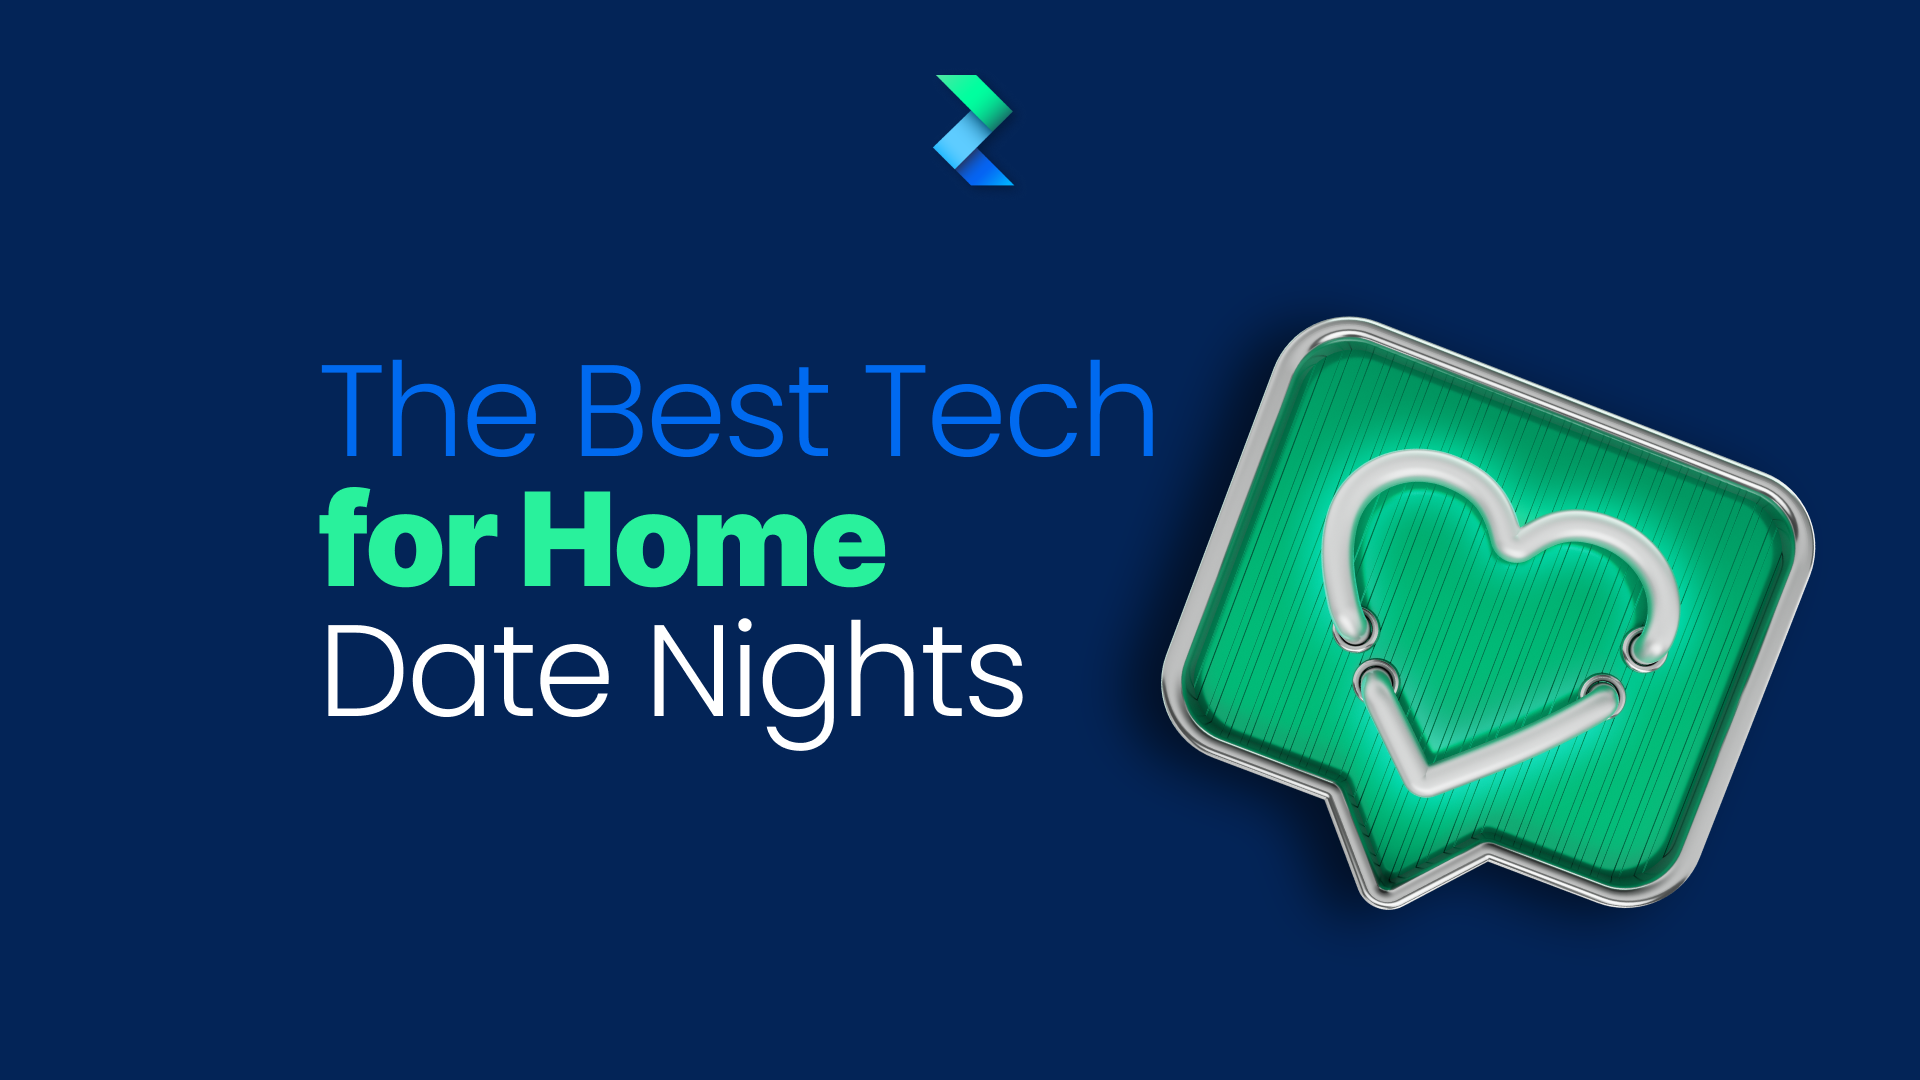 The Best Tech for Home Date Nights